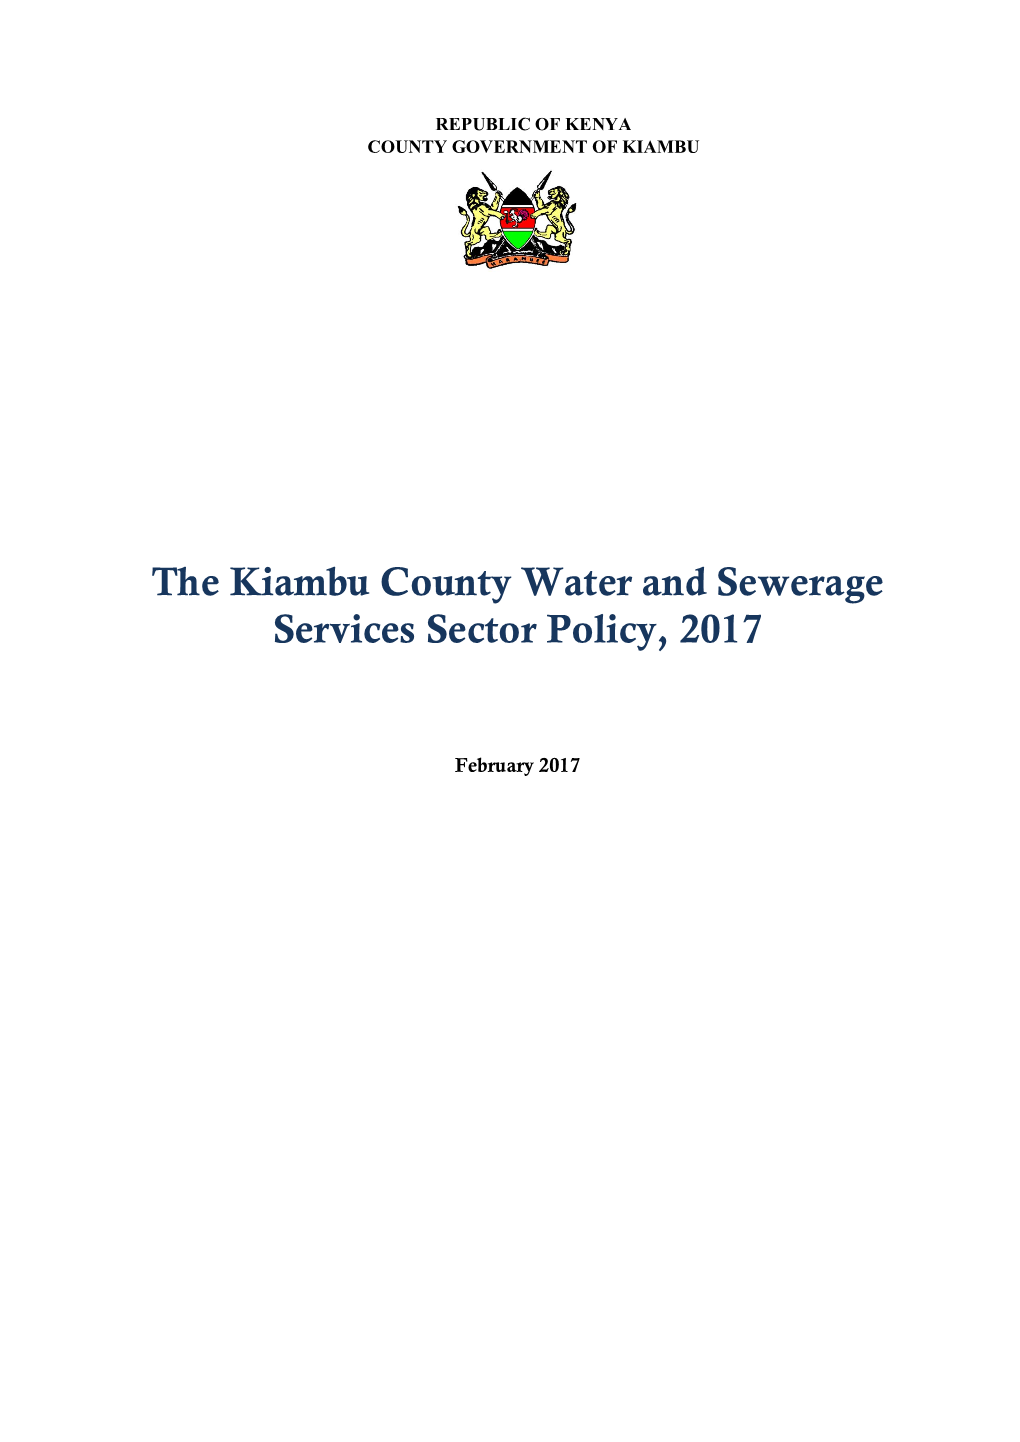 The Kiambu County Water and Sewerage Services Sector Policy, 2017